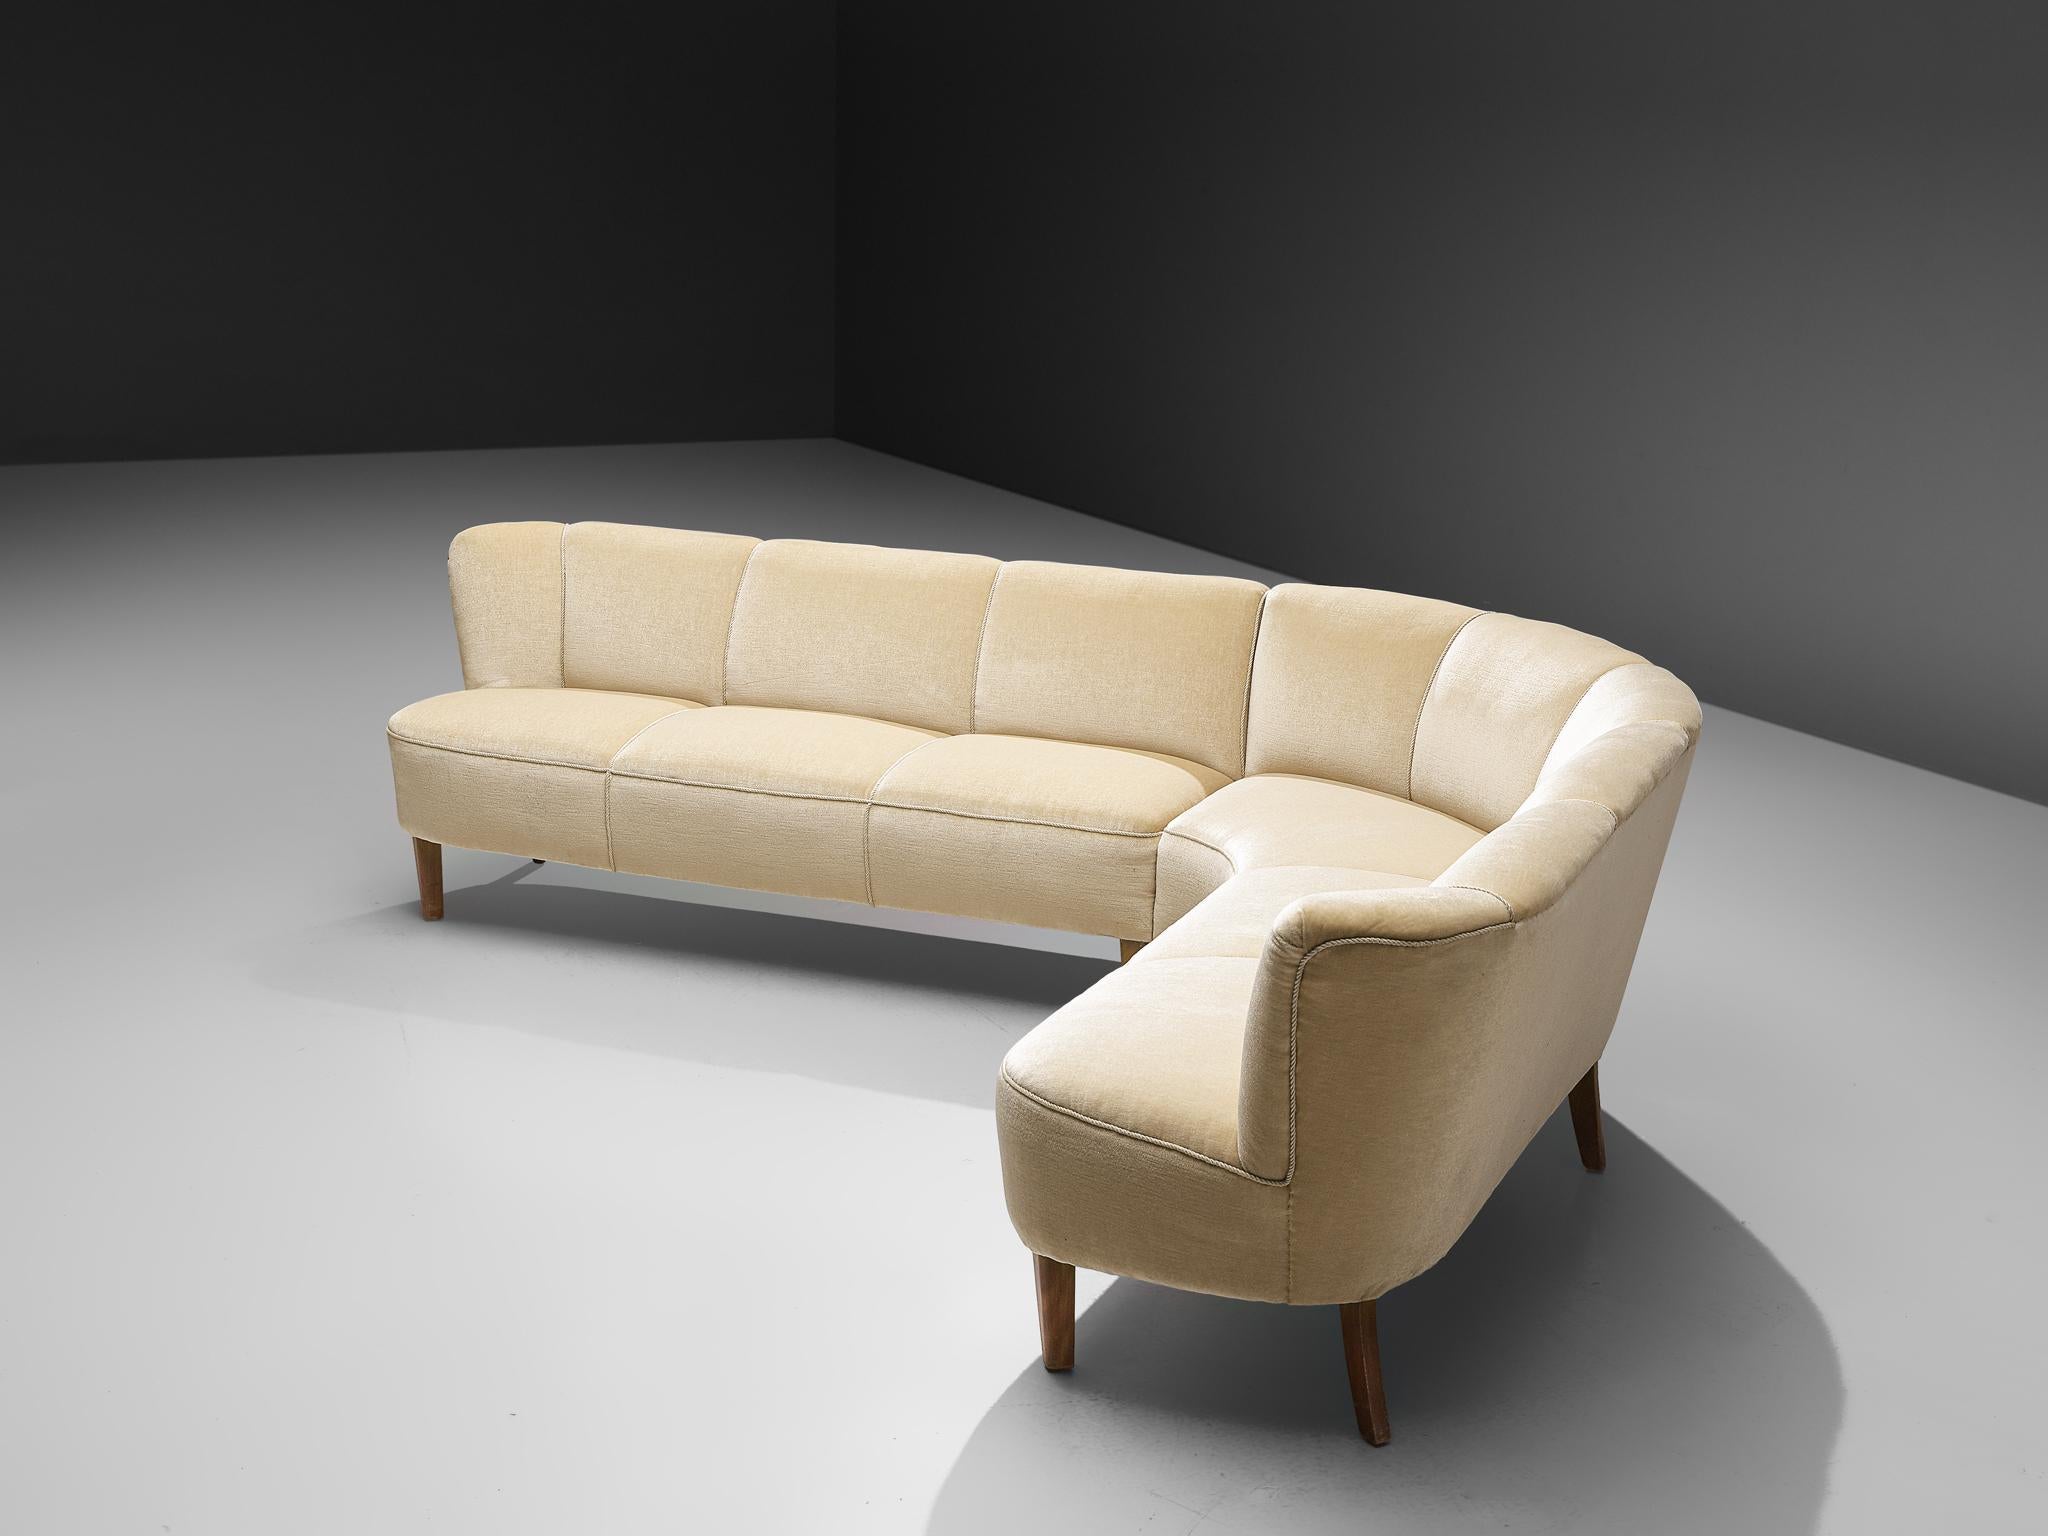 Boomerang sofa, fabric and beech, Denmark, 1970s

A voluptuous sectional sofa, consisting of two parts, The large L-shaped sofa This elegant, curved sofa features a thick, bulky backrest that flows slightly outwards. The sofa is upholstered in a